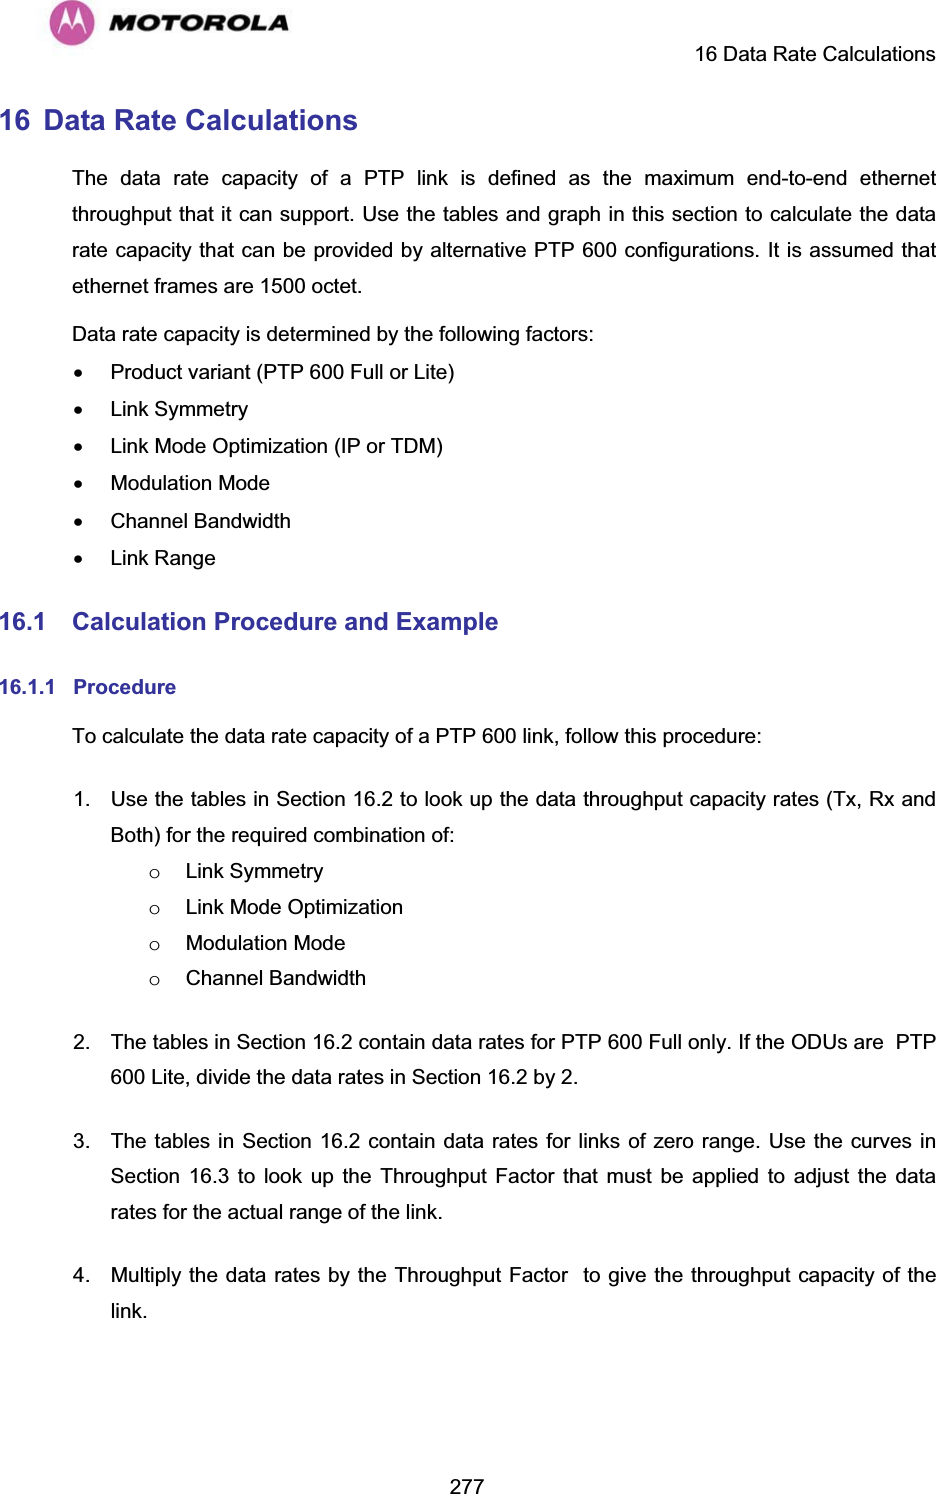     16 Data Rate Calculations  27716  Data Rate Calculations The data rate capacity of a PTP link is defined as the maximum end-to-end ethernet throughput that it can support. Use the tables and graph in this section to calculate the data rate capacity that can be provided by alternative PTP 600 configurations. It is assumed that ethernet frames are 1500 octet. Data rate capacity is determined by the following factors: x  Product variant (PTP 600 Full or Lite) x Link Symmetry x  Link Mode Optimization (IP or TDM) x Modulation Mode x Channel Bandwidth x Link Range 16.1 Calculation Procedure and Example 16.1.1 Procedure To calculate the data rate capacity of a PTP 600 link, follow this procedure: 1.  Use the tables in Section 16.2 to look up the data throughput capacity rates (Tx, Rx and Both) for the required combination of: o Link Symmetry o  Link Mode Optimization o Modulation Mode o Channel Bandwidth 2.  The tables in Section 16.2 contain data rates for PTP 600 Full only. If the ODUs are  PTP 600 Lite, divide the data rates in Section 16.2 by 2. 3.  The tables in Section 16.2 contain data rates for links of zero range. Use the curves in Section 16.3 to look up the Throughput Factor that must be applied to adjust the data rates for the actual range of the link. 4.  Multiply the data rates by the Throughput Factor  to give the throughput capacity of the link.  